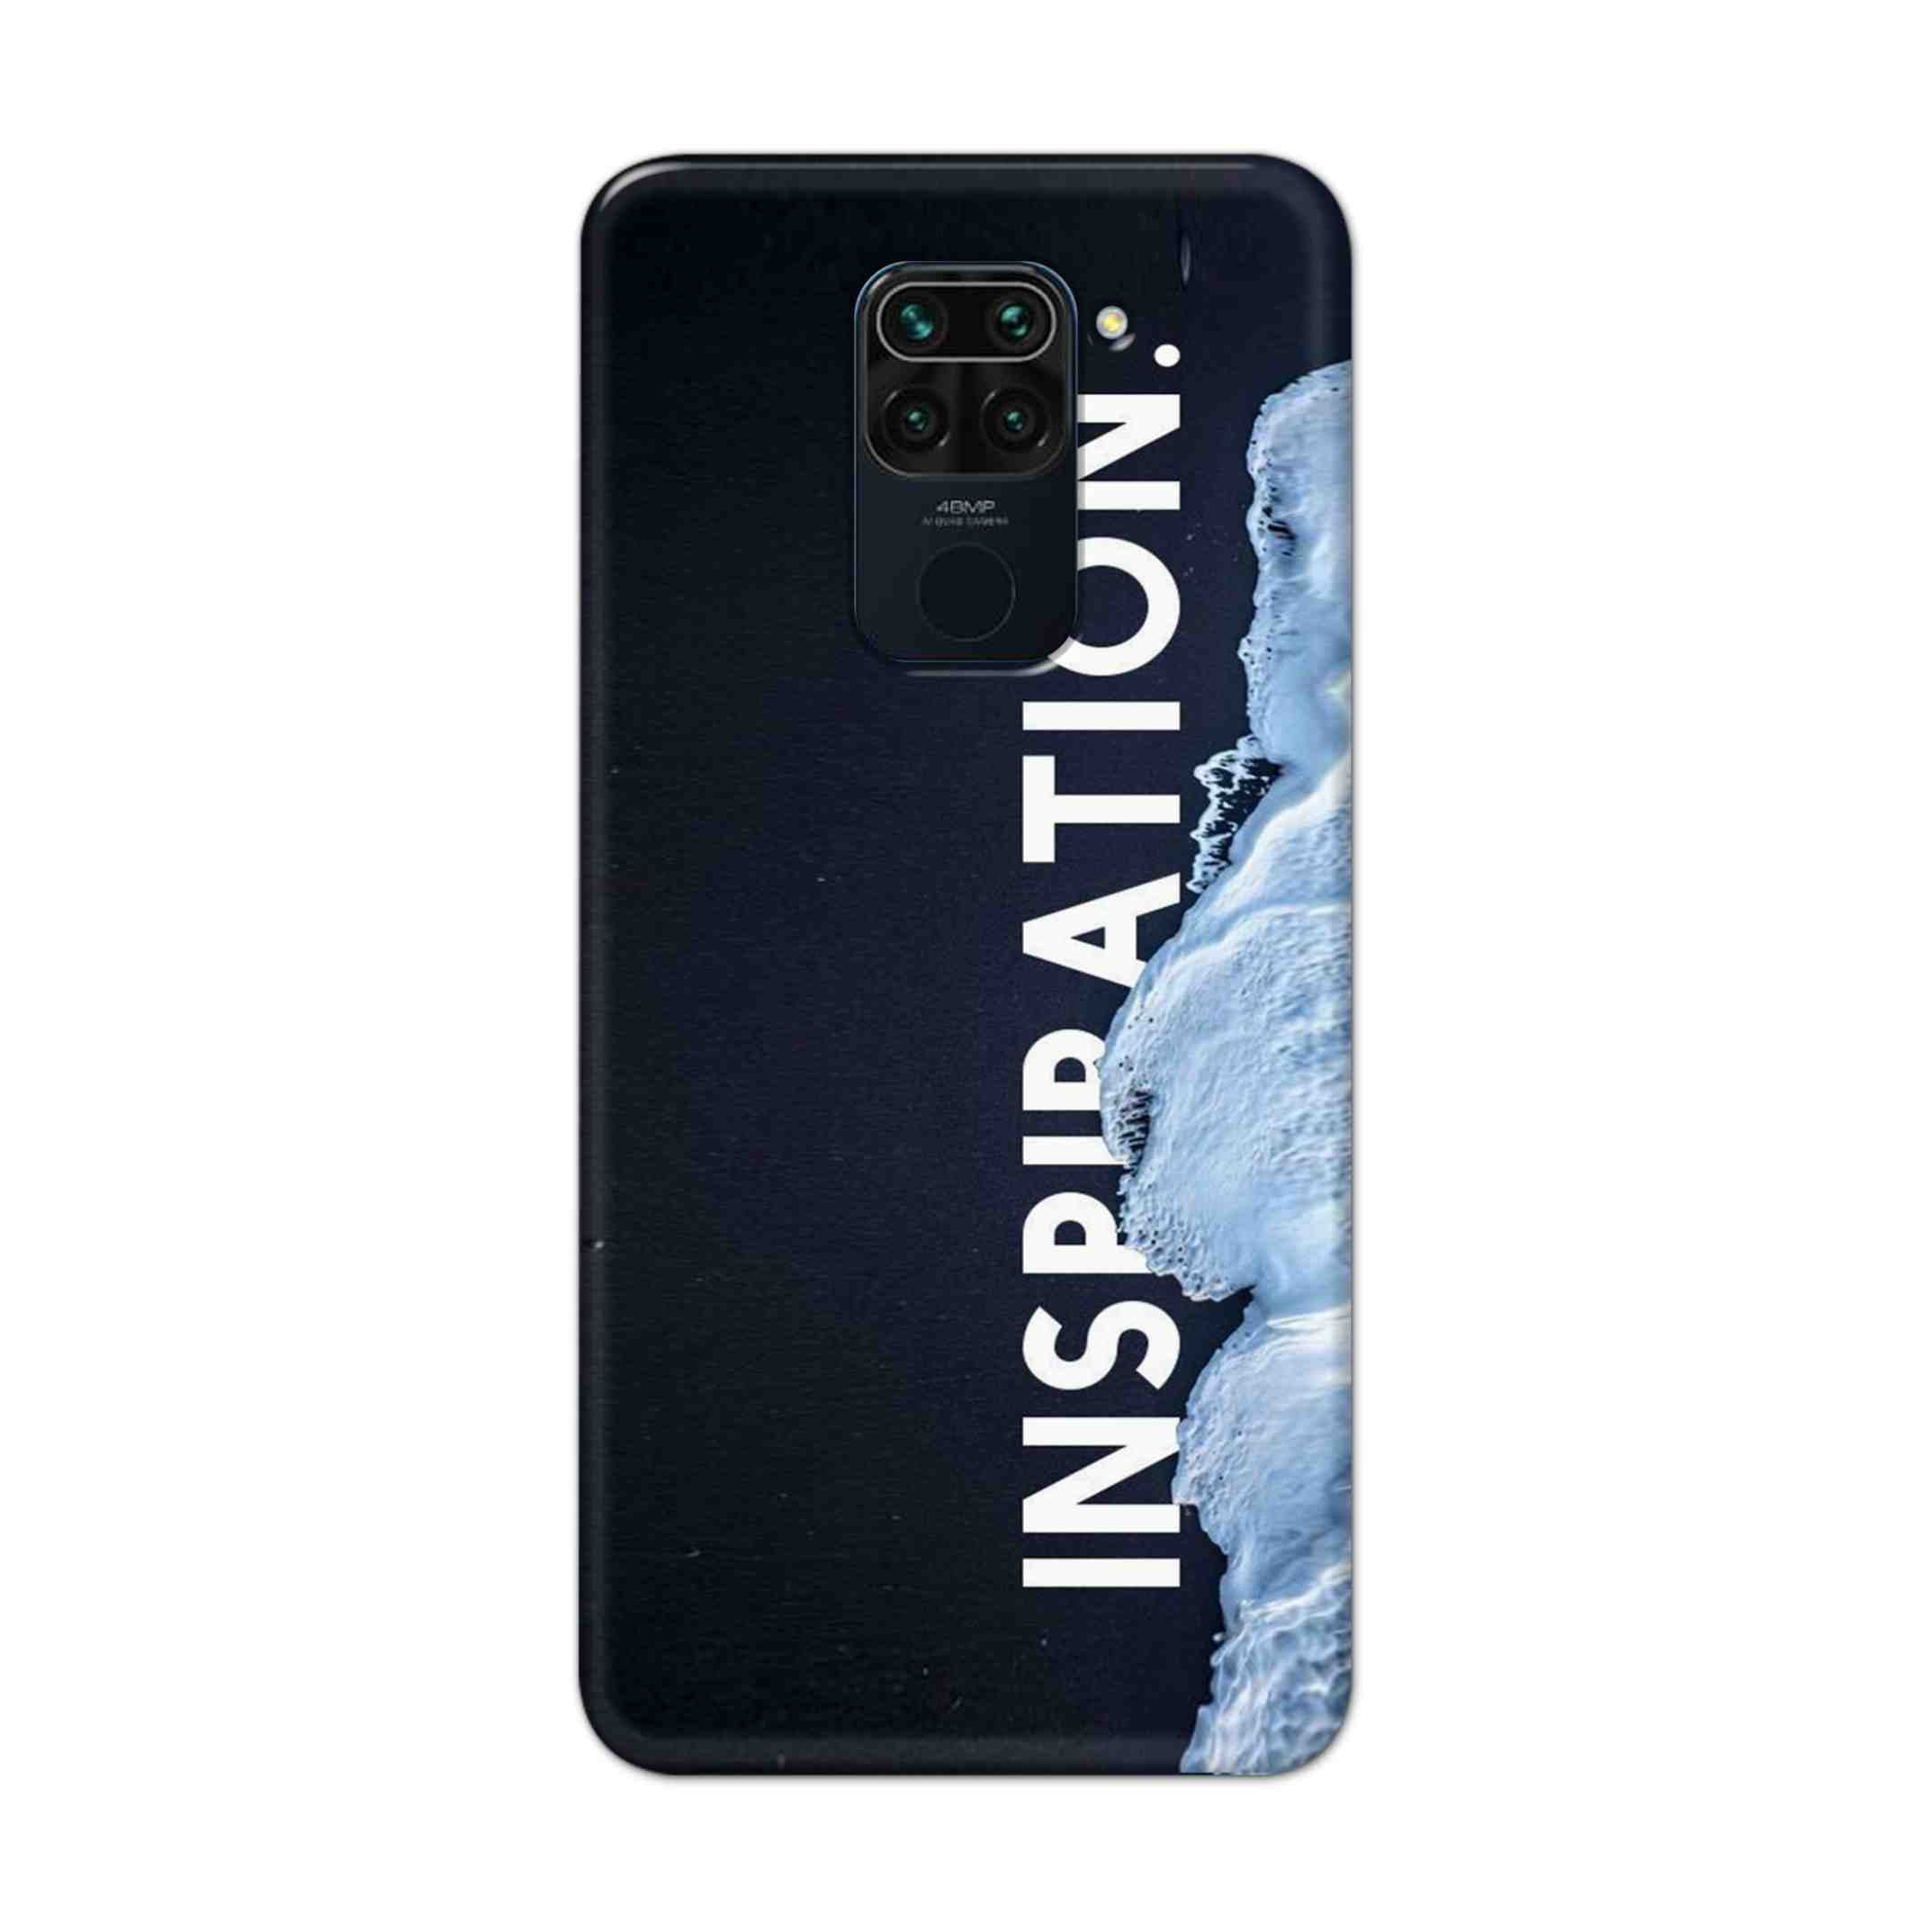 Buy Inspiration Hard Back Mobile Phone Case Cover For Xiaomi Redmi Note 9 Online